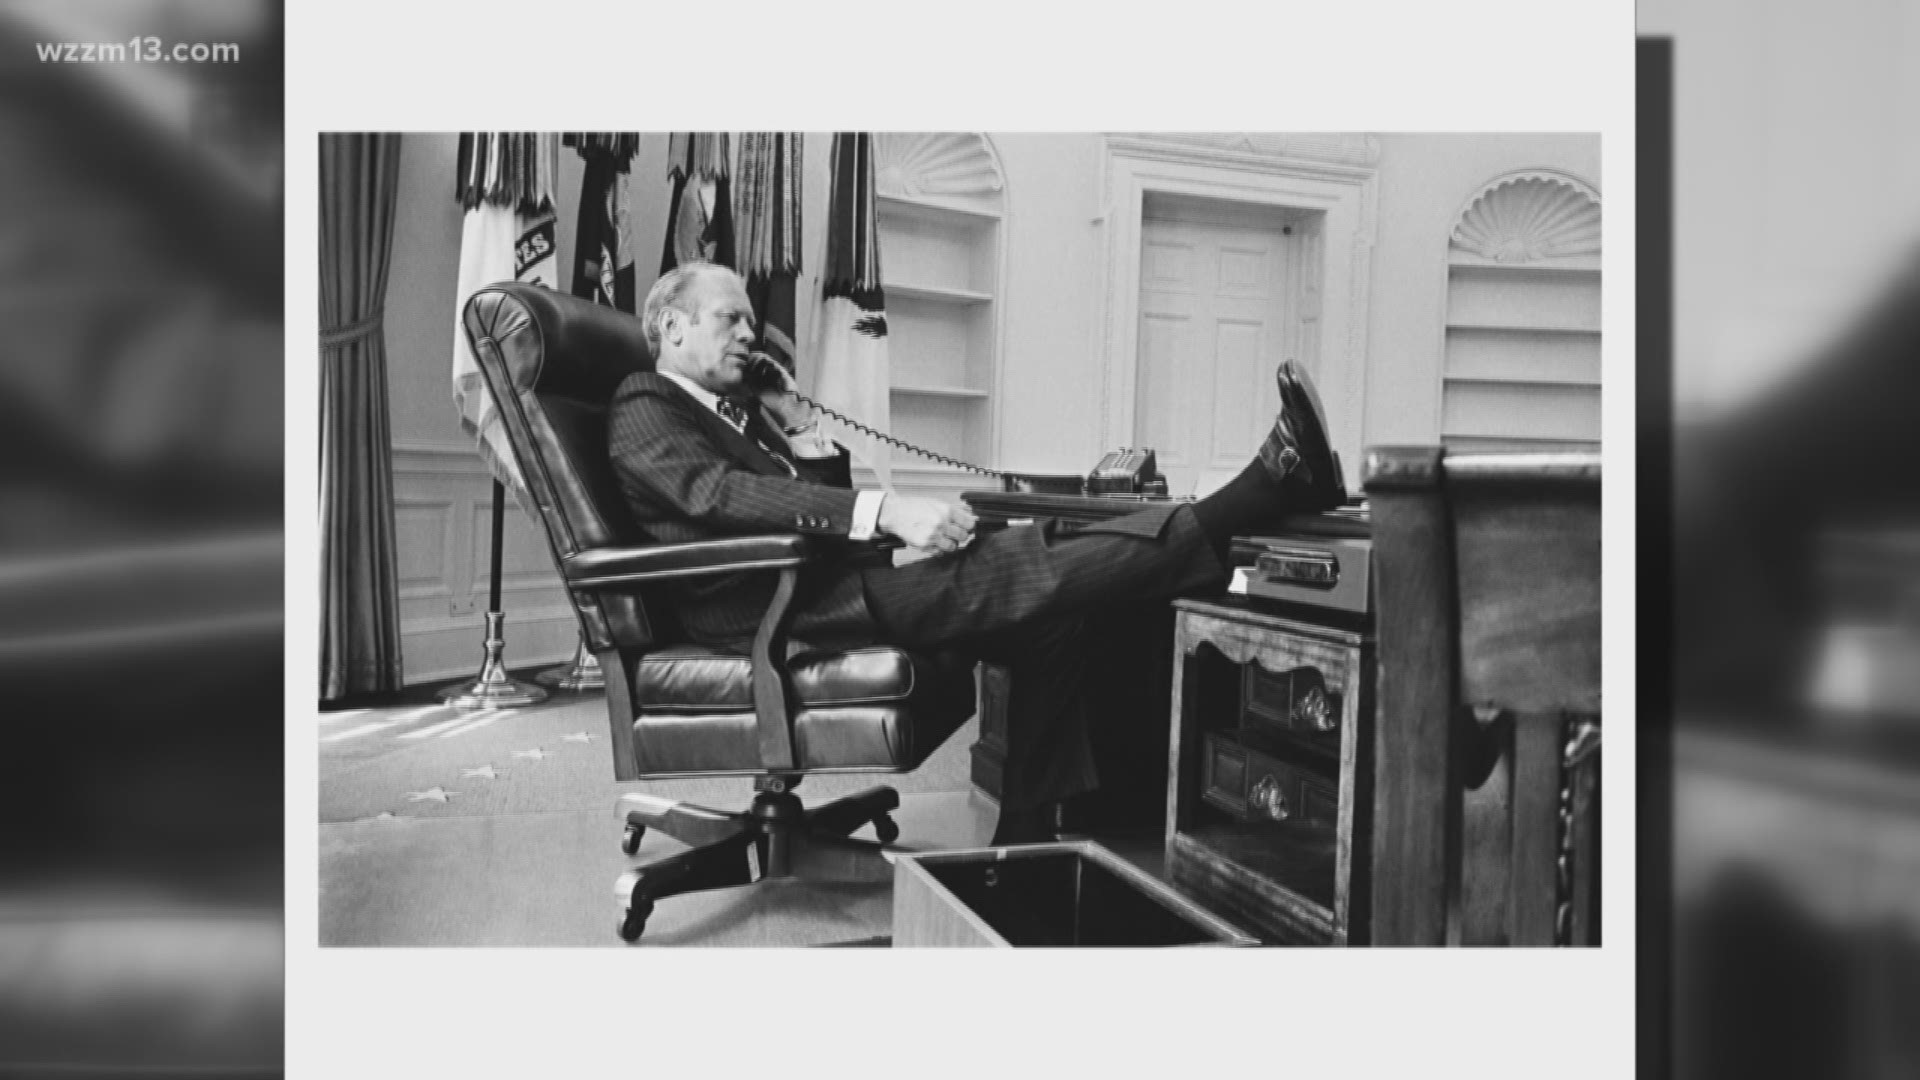 Exhibit features photos from Ford presidency